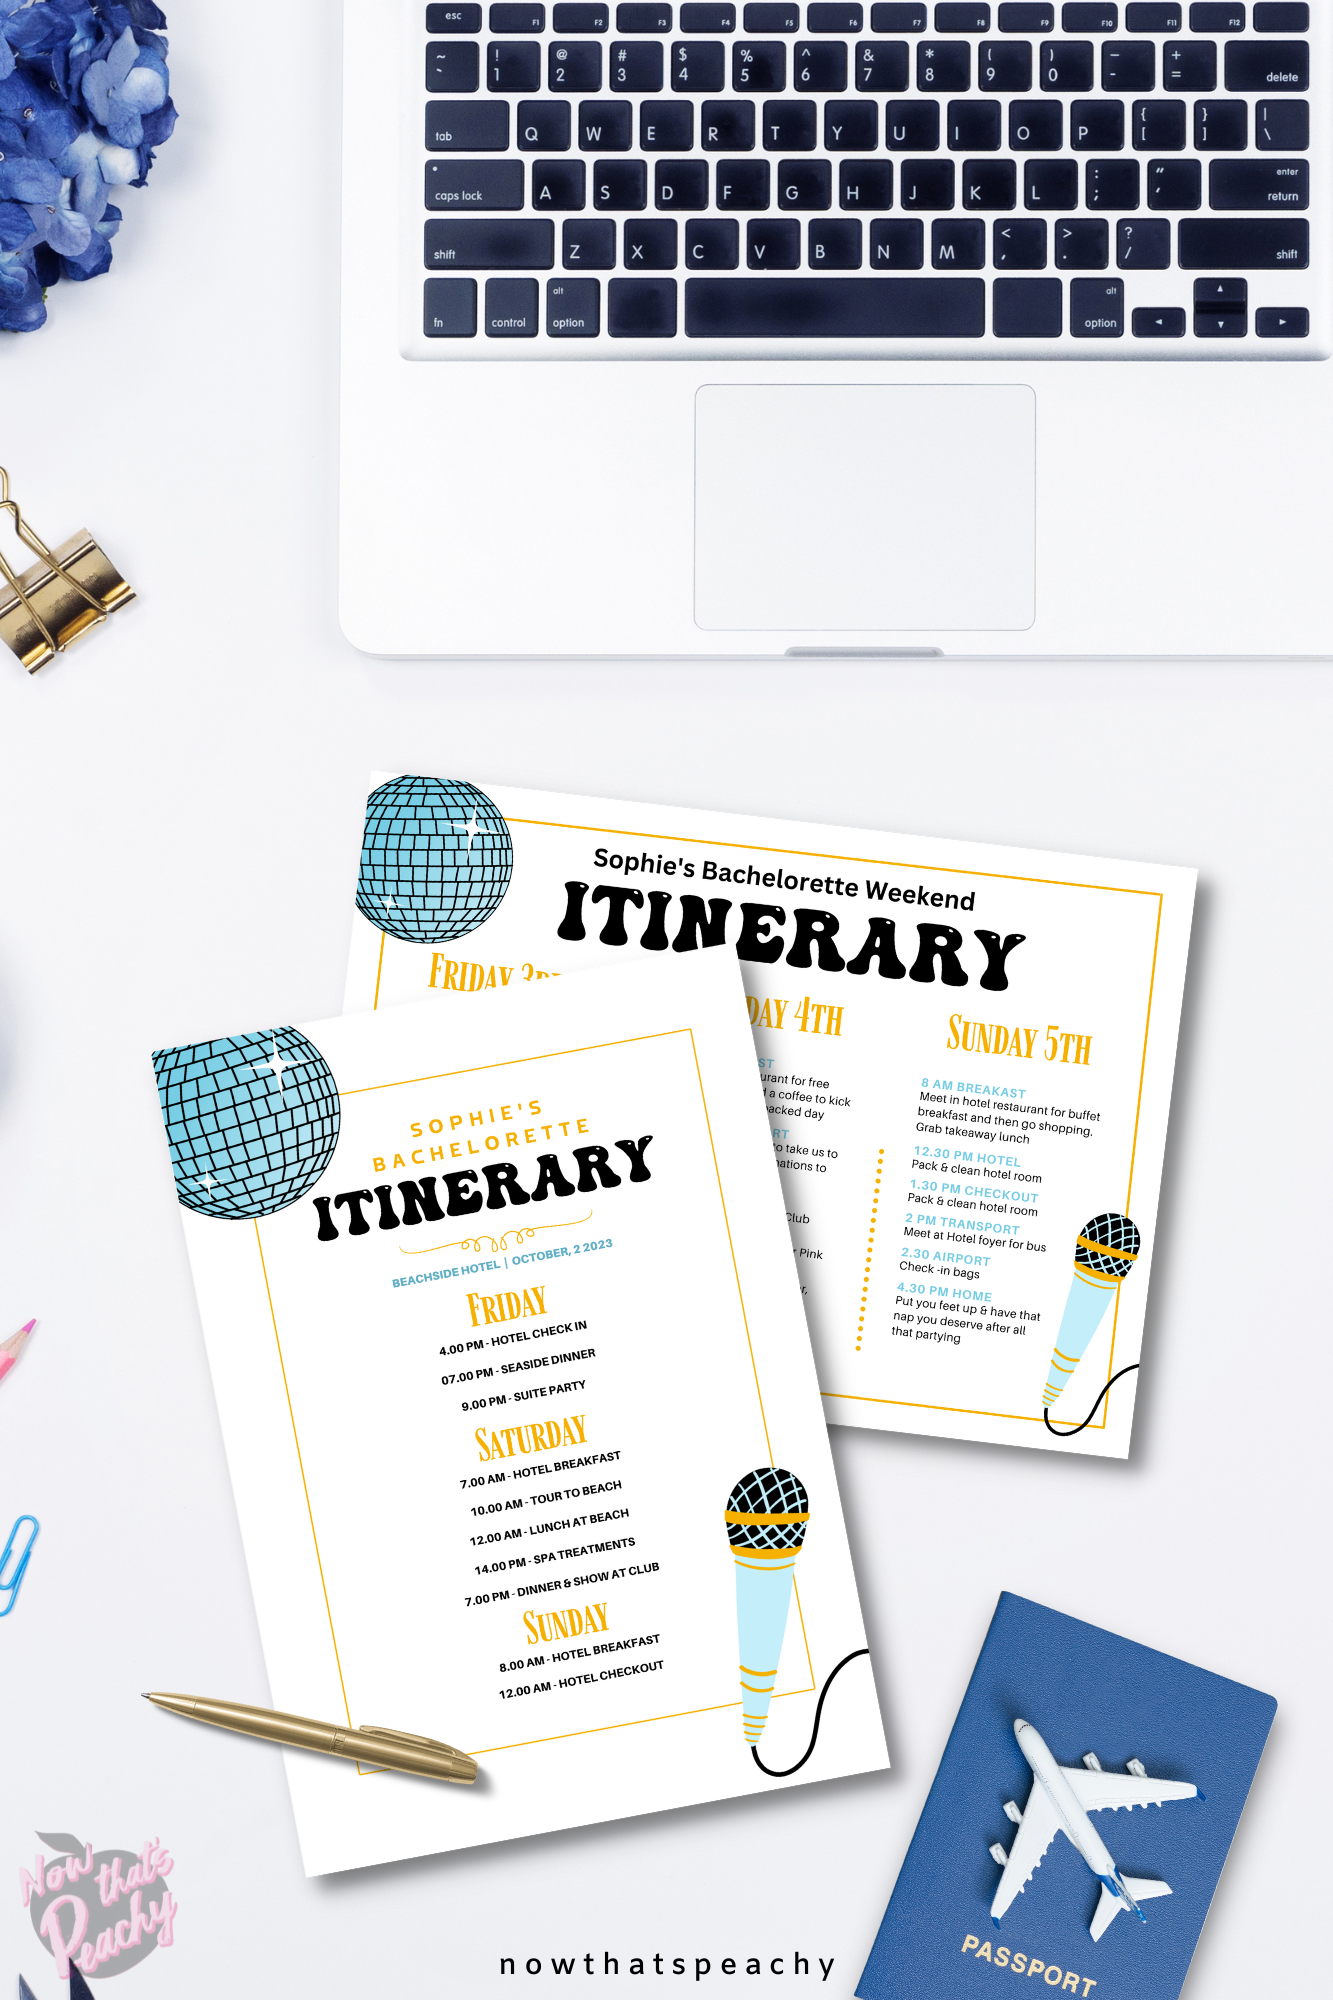 Mamma Mia itinerary getaway 1970s flared denim pants seventies 70's disco ball microphone karaoke studio 54  editable canva printable template digital instant download edit sophie Donna and the dynamos invite edit custom musical movie design gold blue white modern color